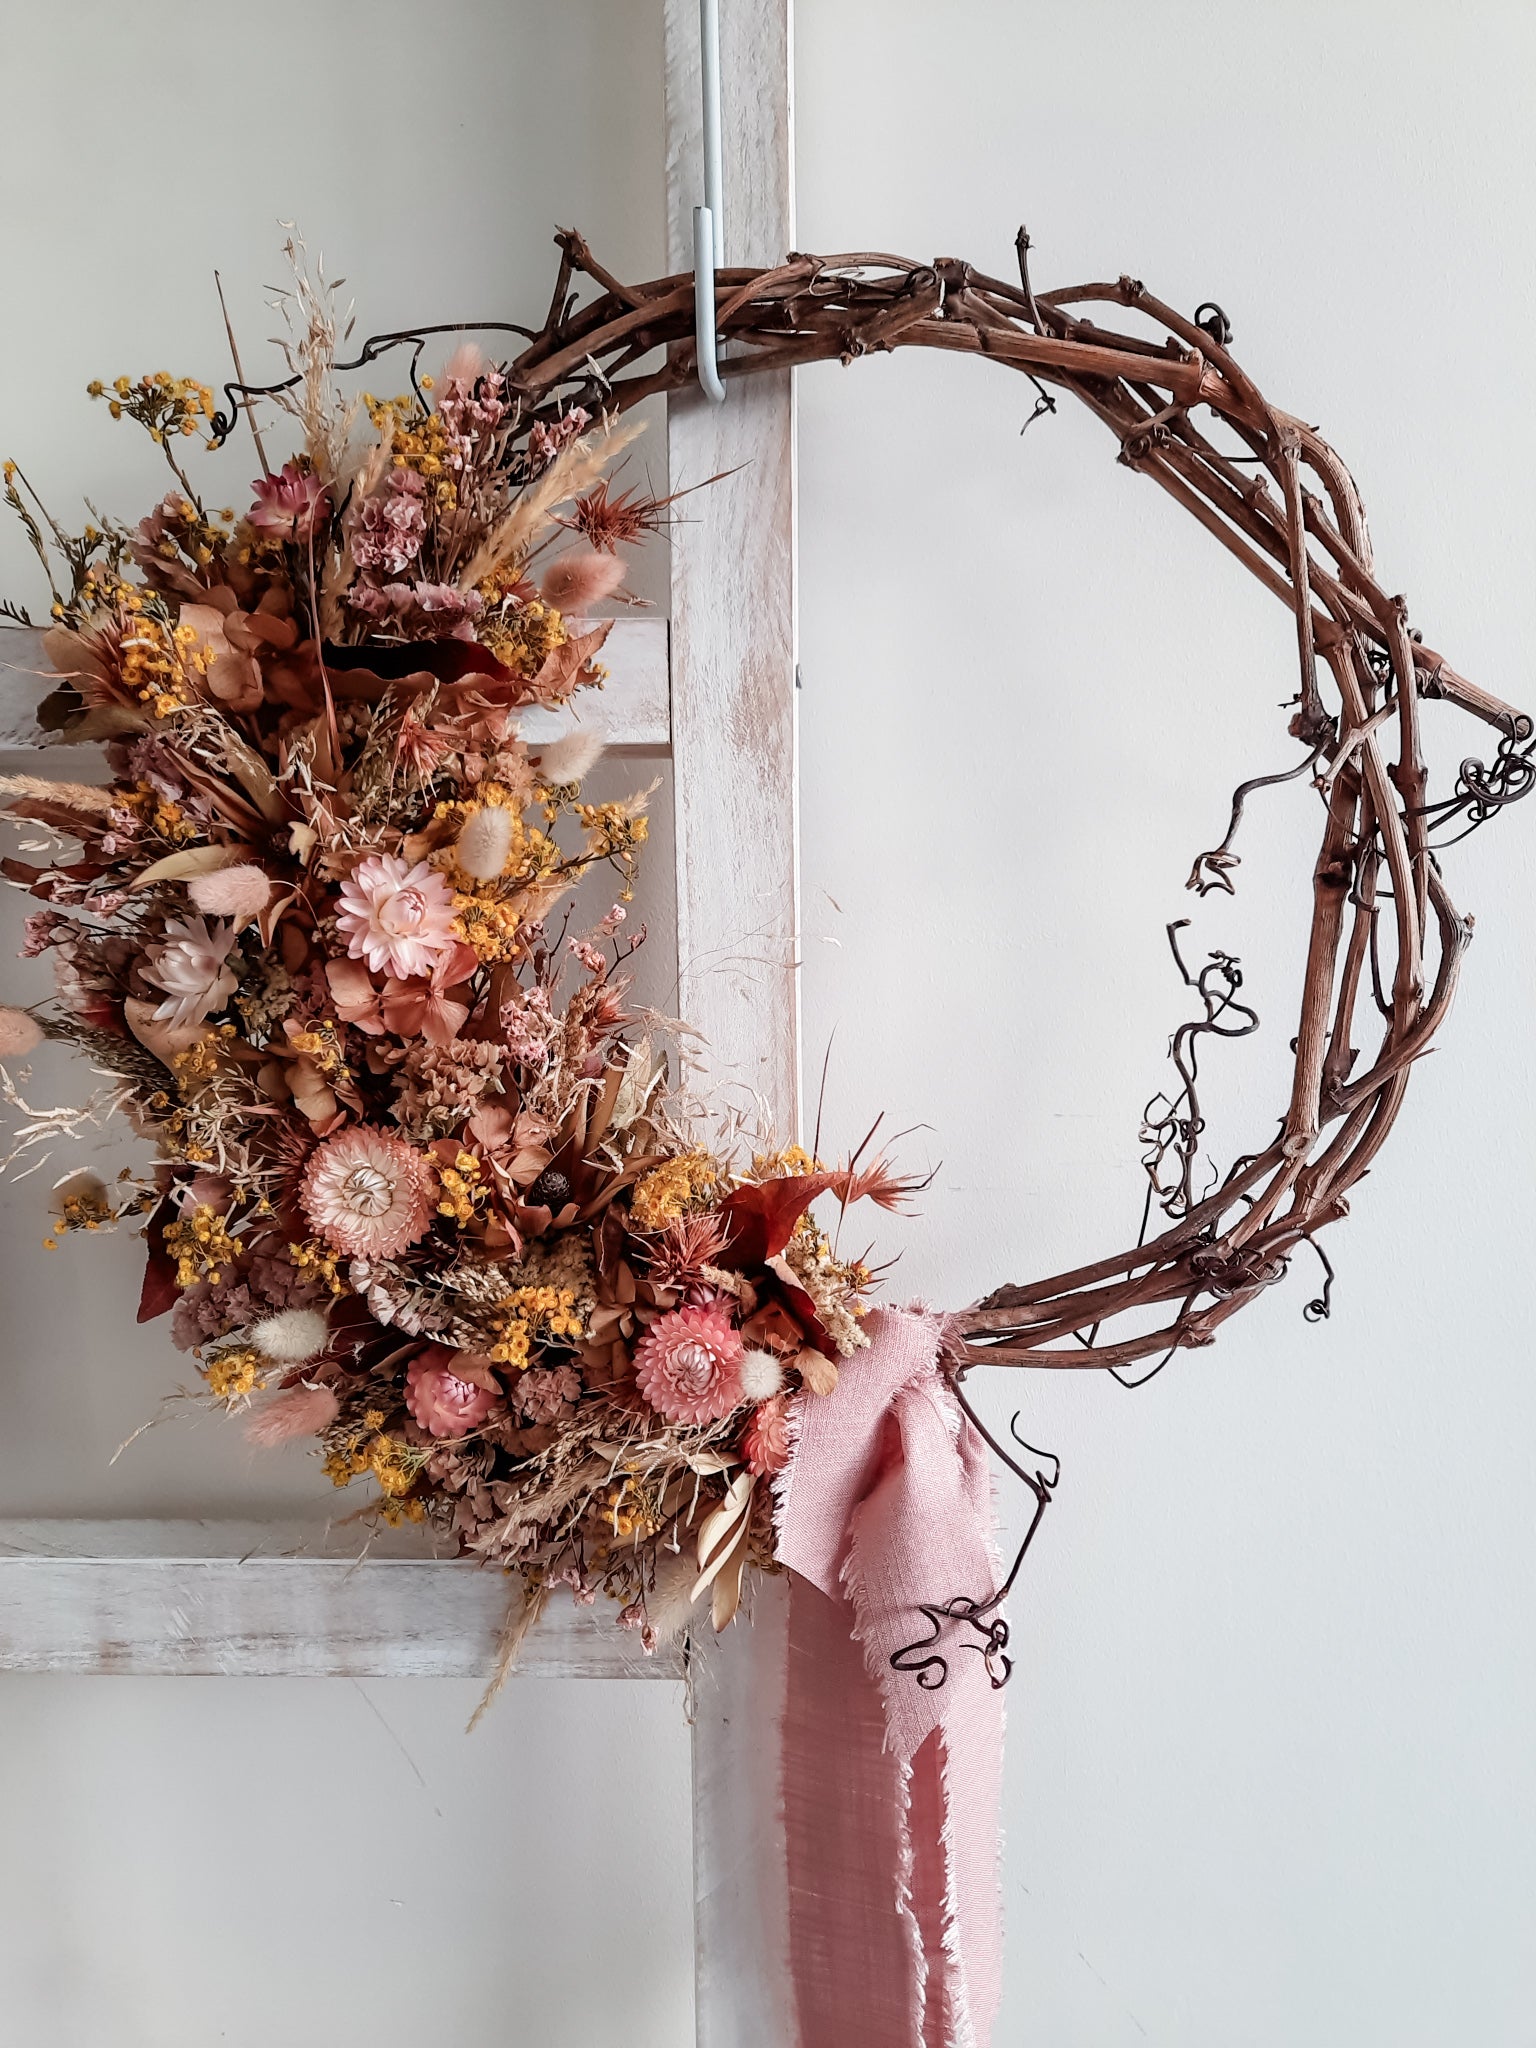 Dried flower wreath in warm tropical tones on a grapevine base.